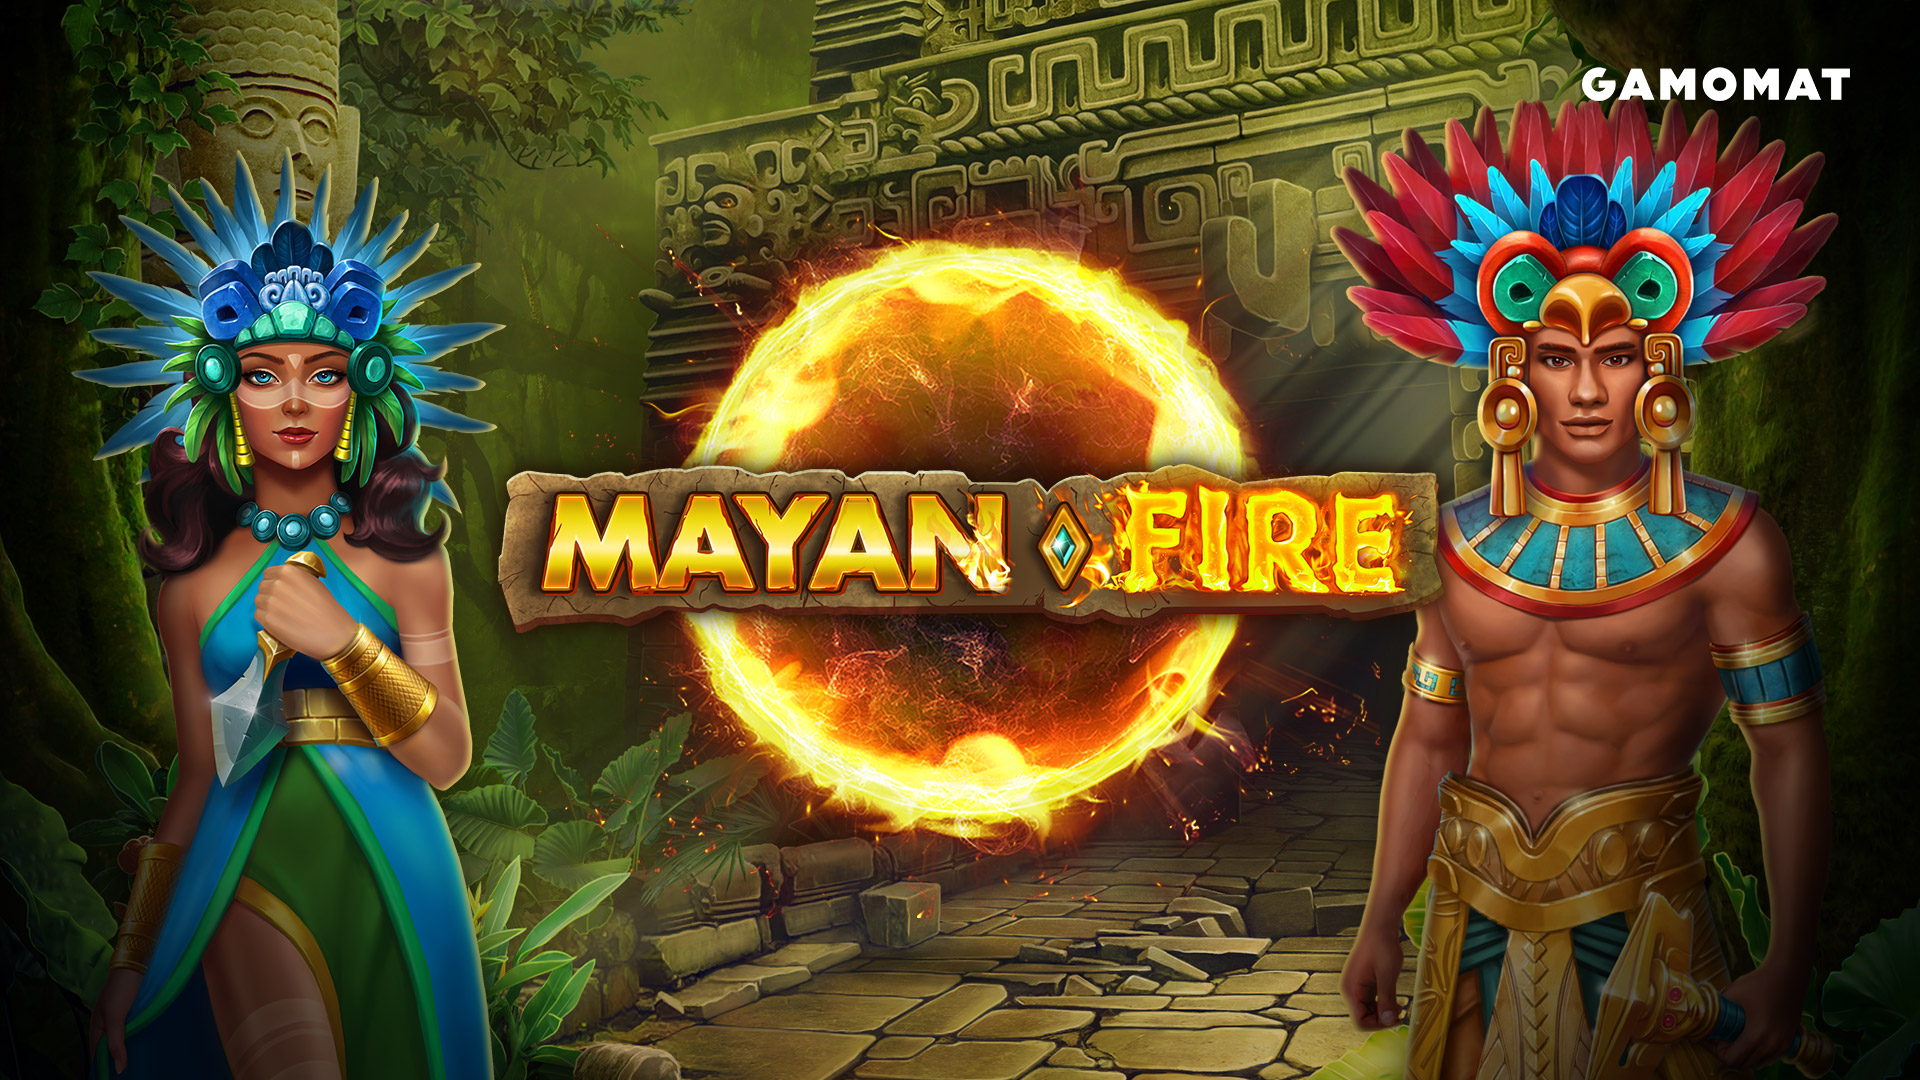 MAYAN FIRE IS ON FIRE$$$!!!